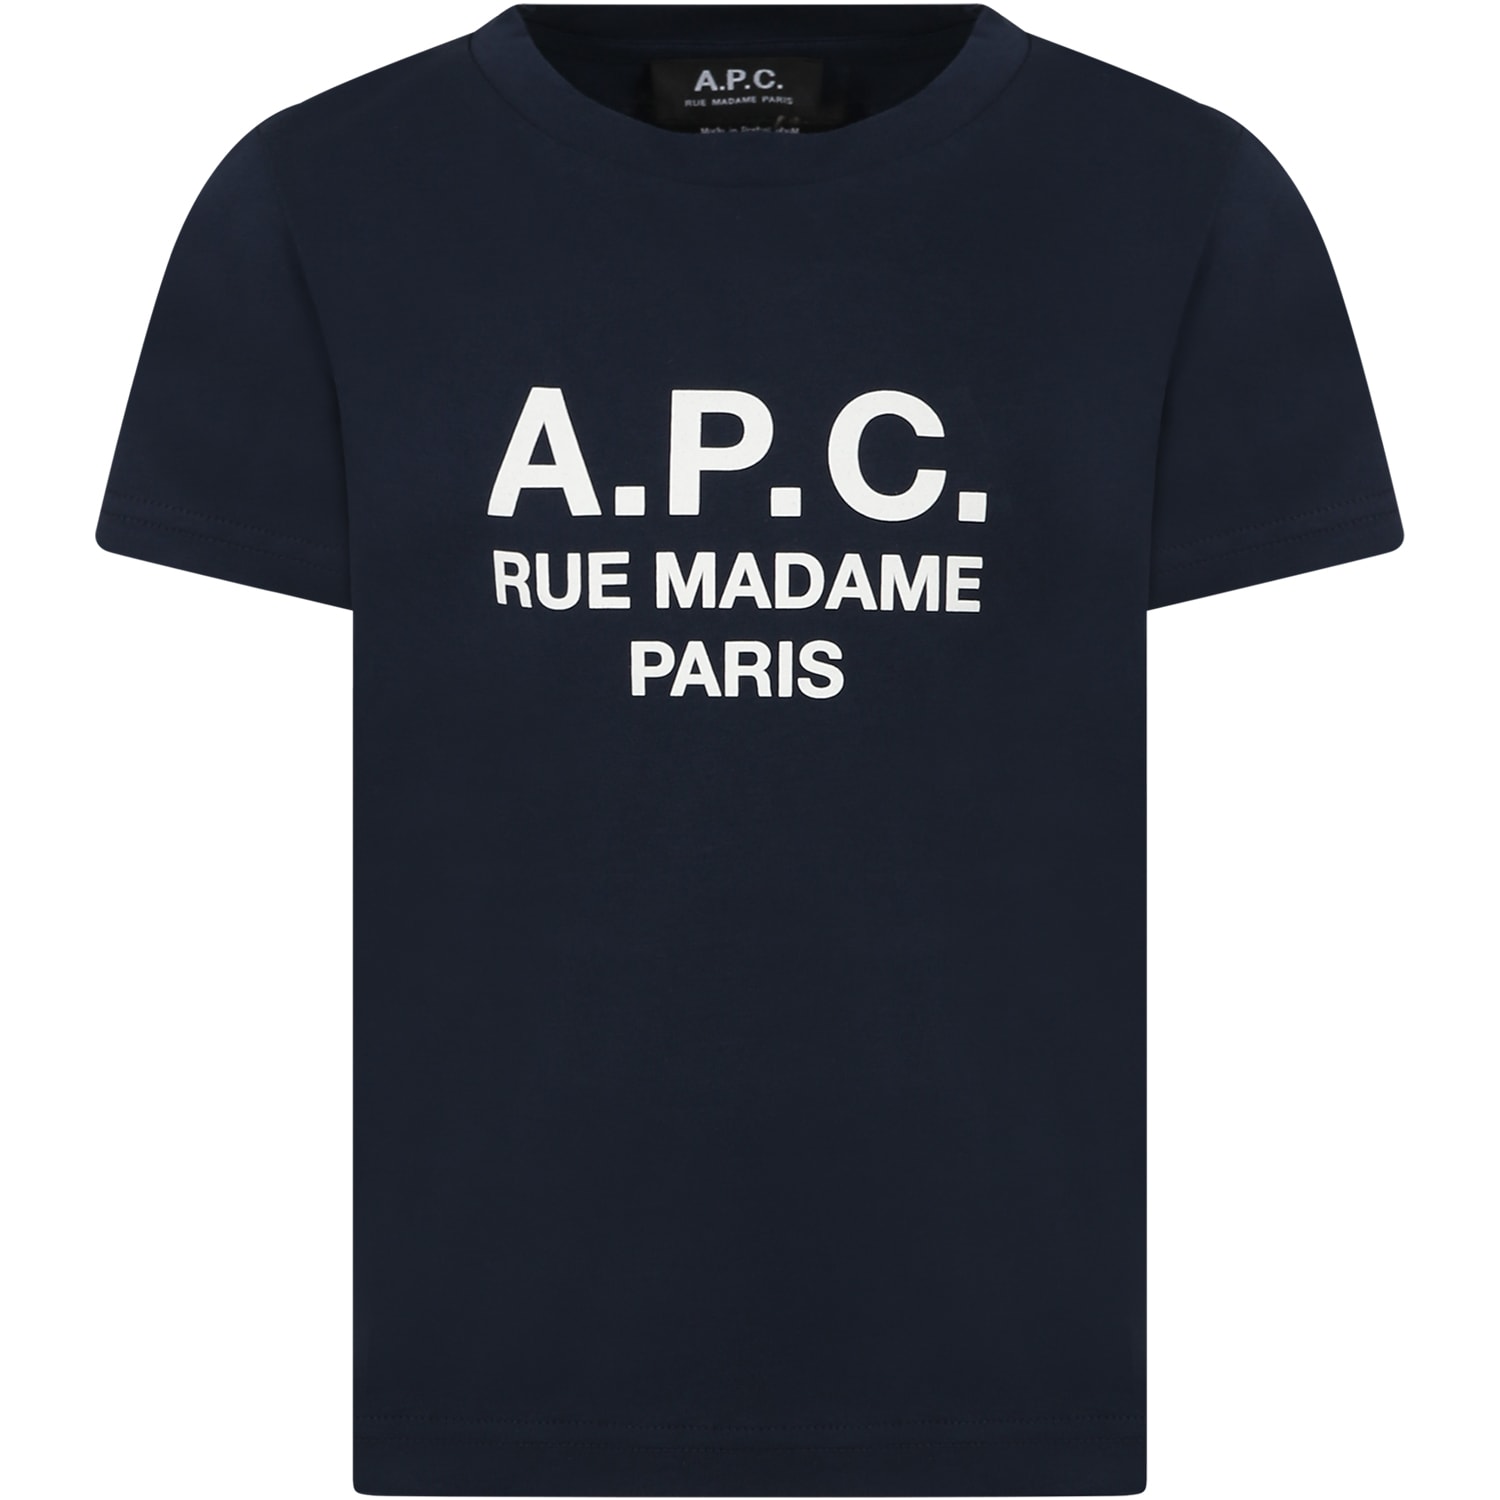 APC BLUE T-SHIRT FOR KIDS WITH LOGO